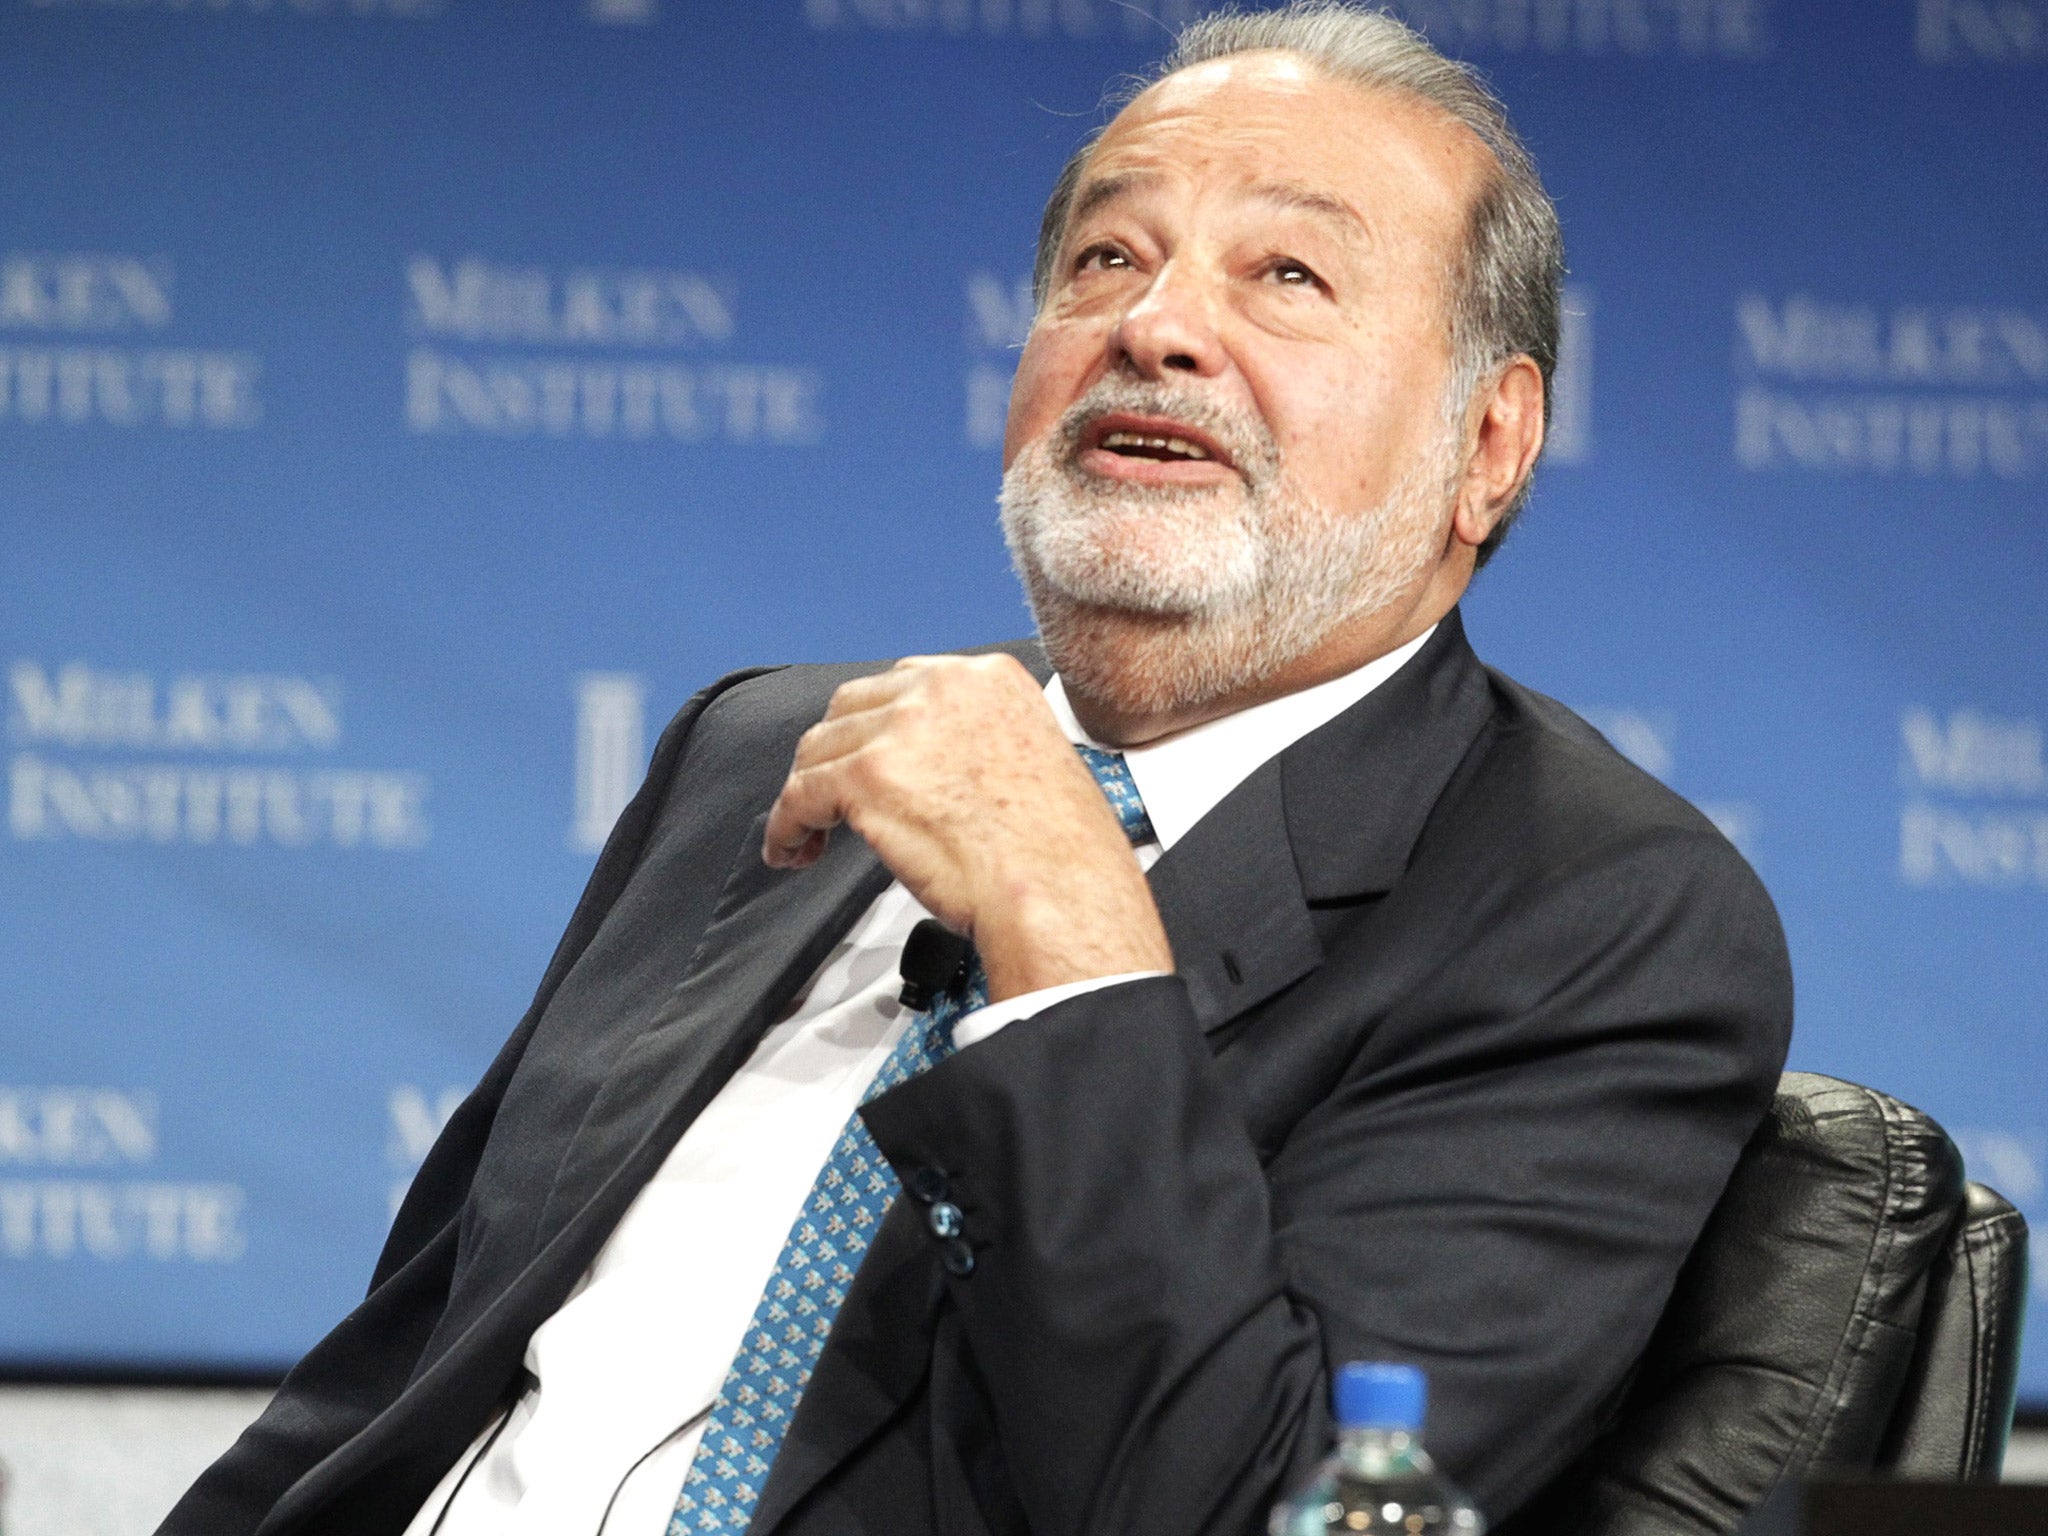 Carlos Slim fell to fifth place